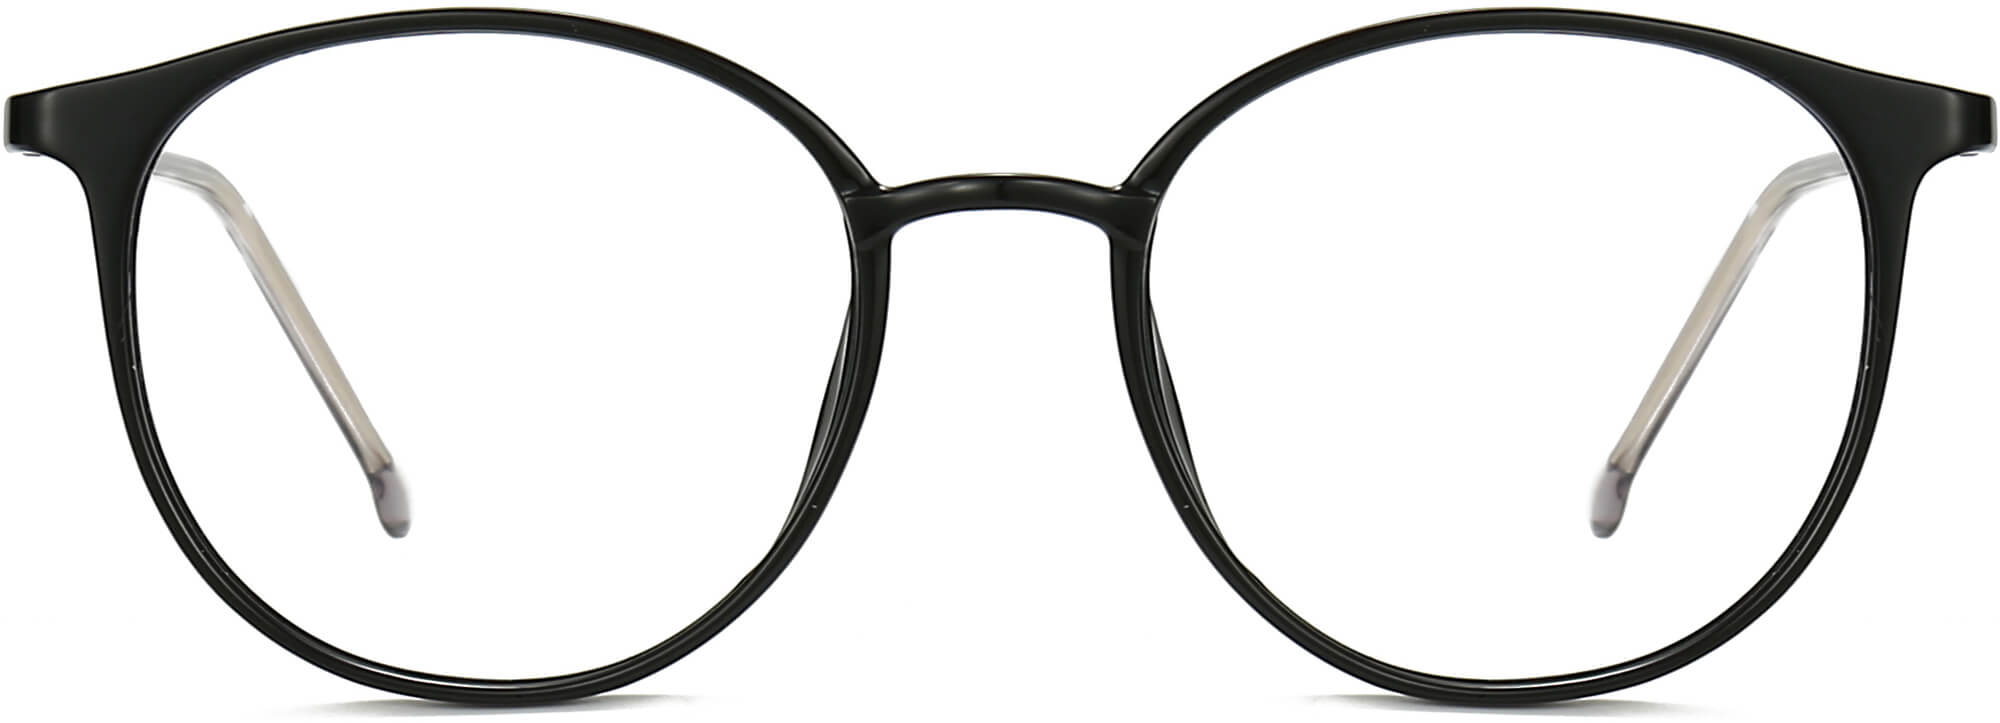 Holland Round Black Eyeglasses from ANRRI, front view